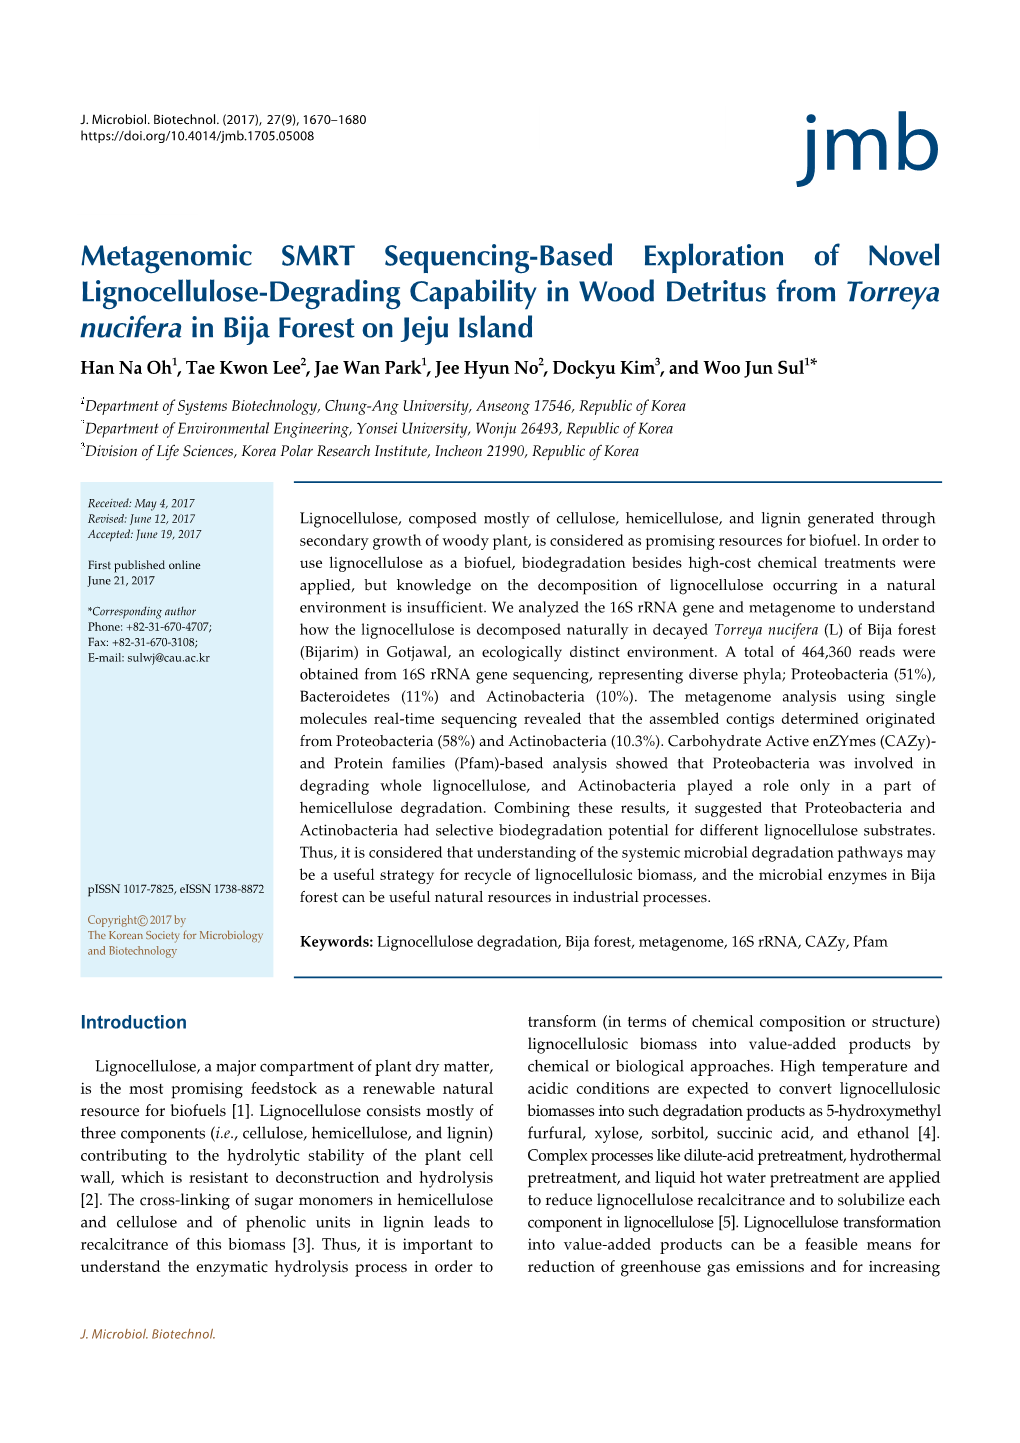 Metagenomic SMRT Sequencing-Based Exploration Of